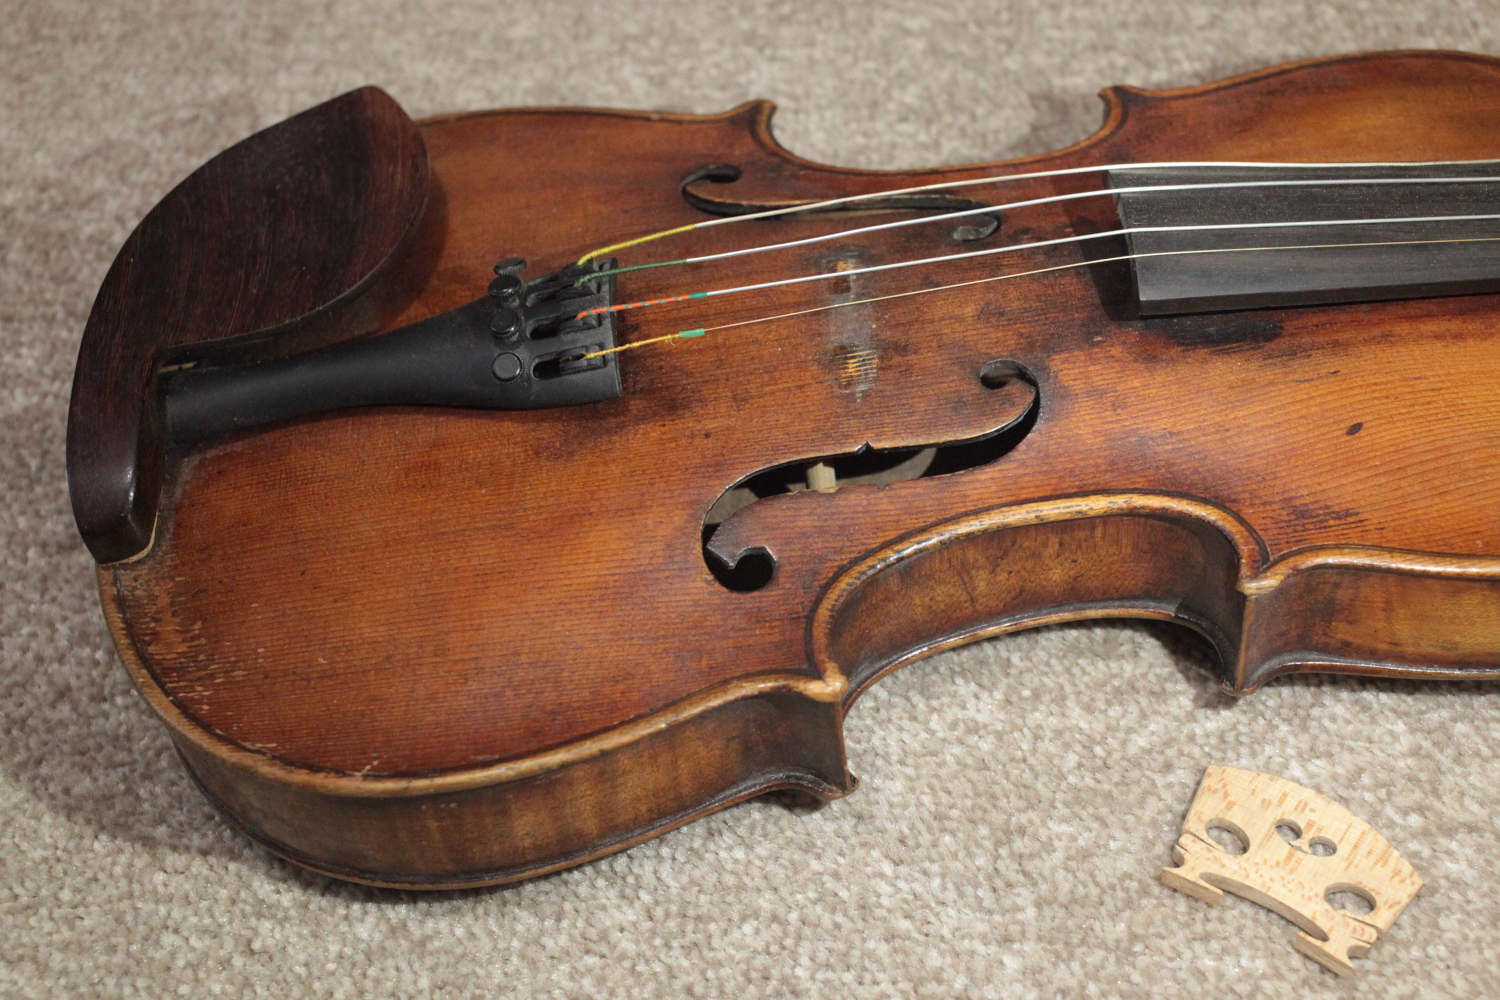 Tips For Violinists: How To Fix Simple Issues With Your Violin